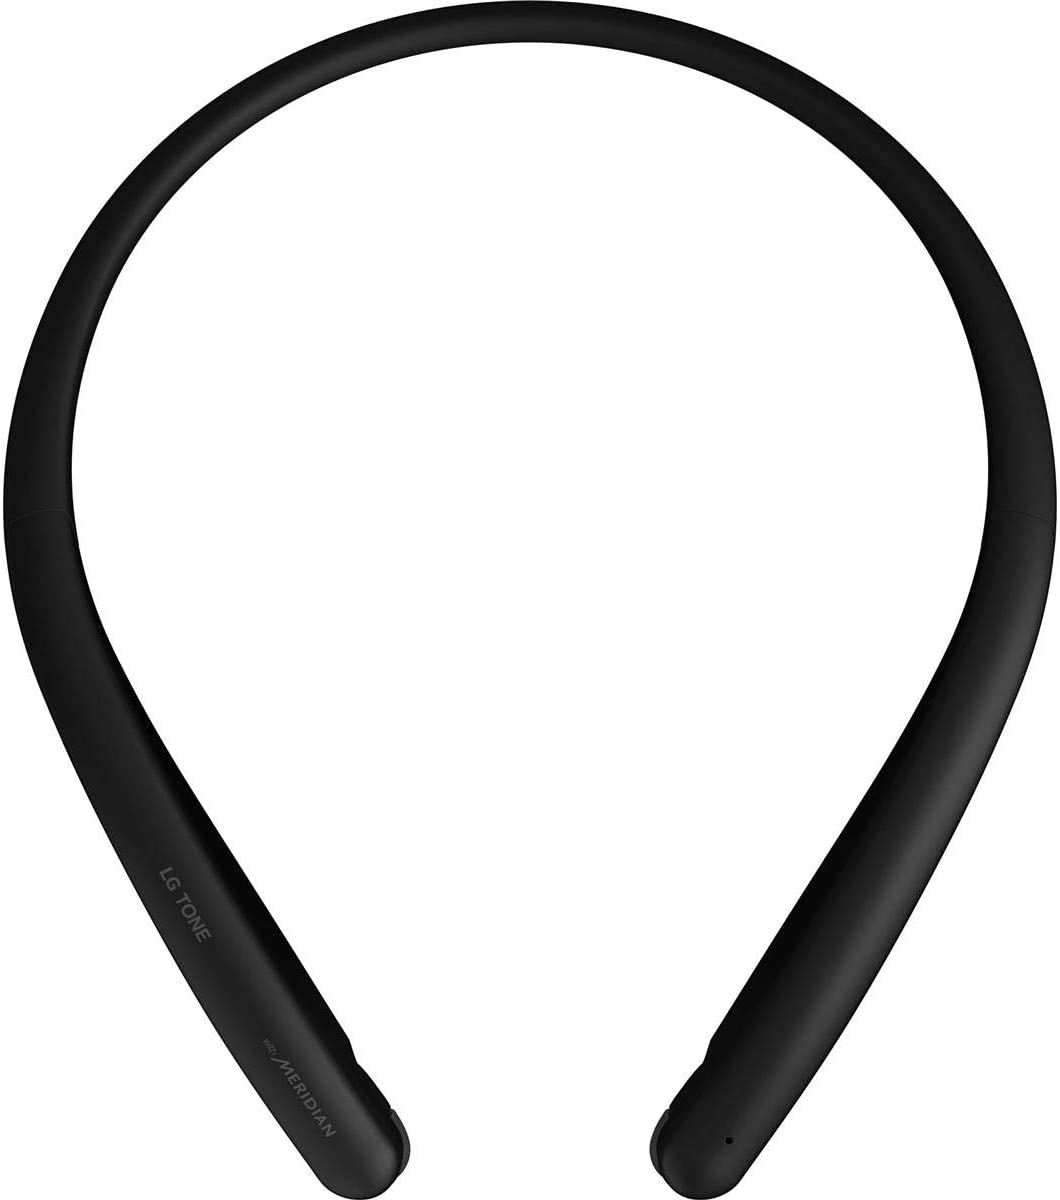 LG Tone Style Bluetooth Wireless Stereo Neckband Earbuds Tuned by Meridian Audio -  HBS-SL5 - This item is gift with some LG TVs and is not for sale